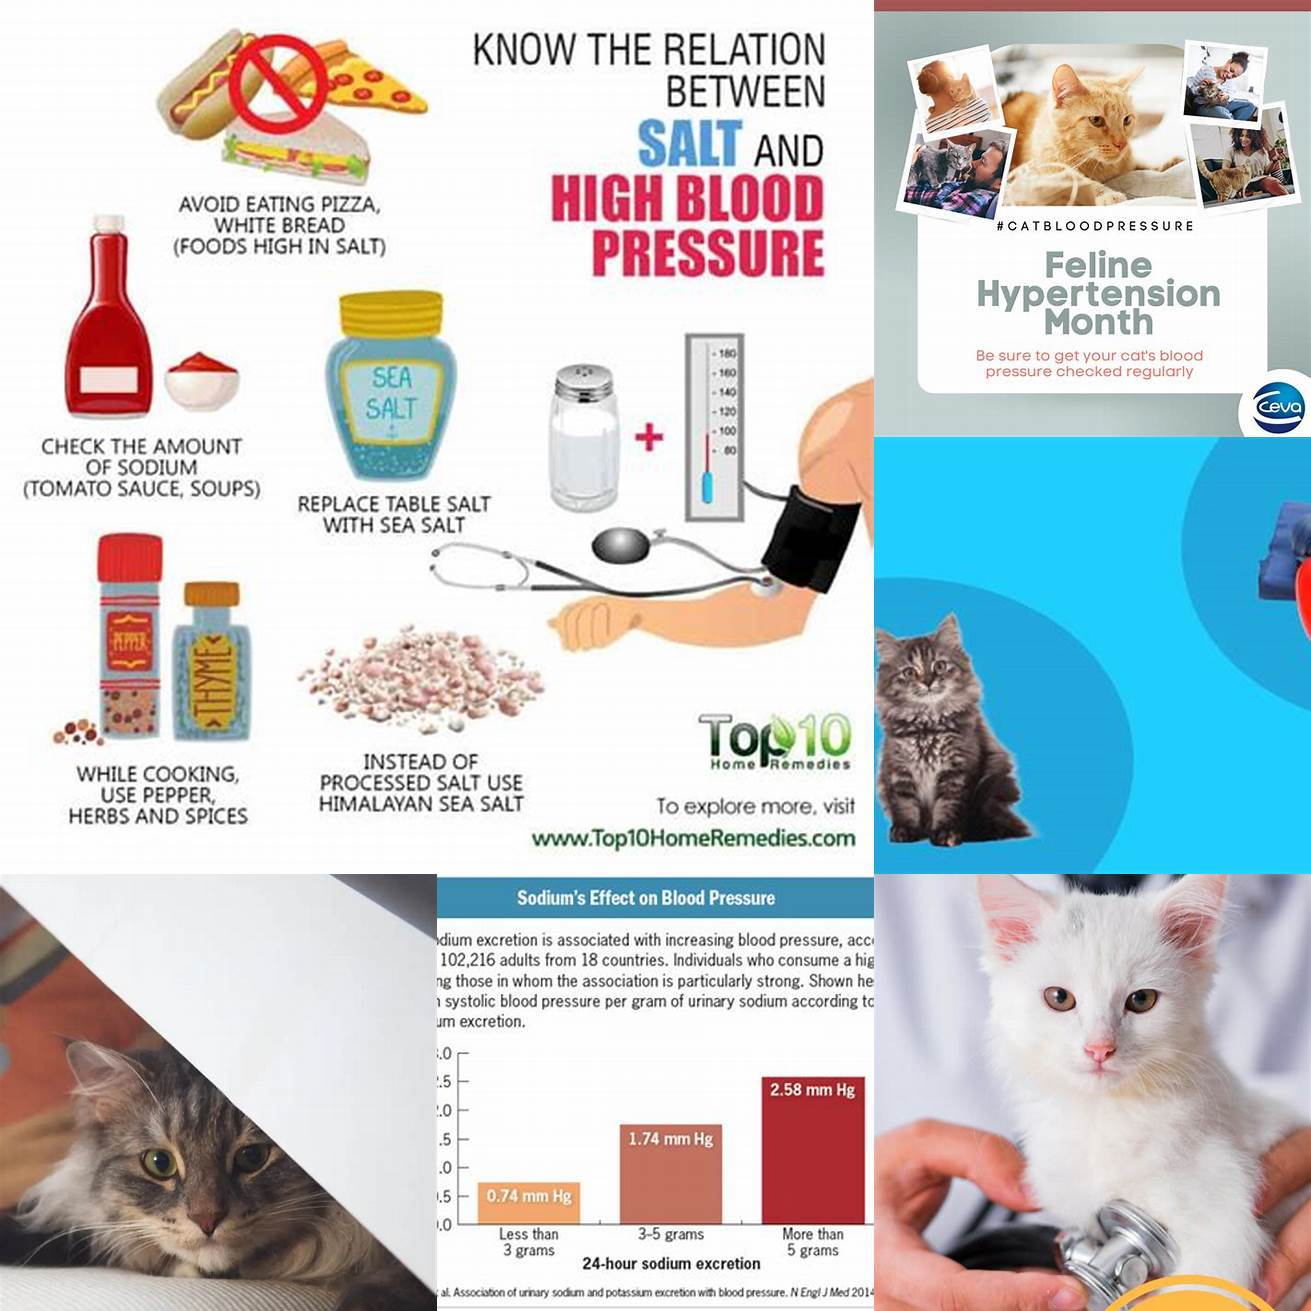 High Blood Pressure The high sodium content in ketchup can lead to high blood pressure in cats